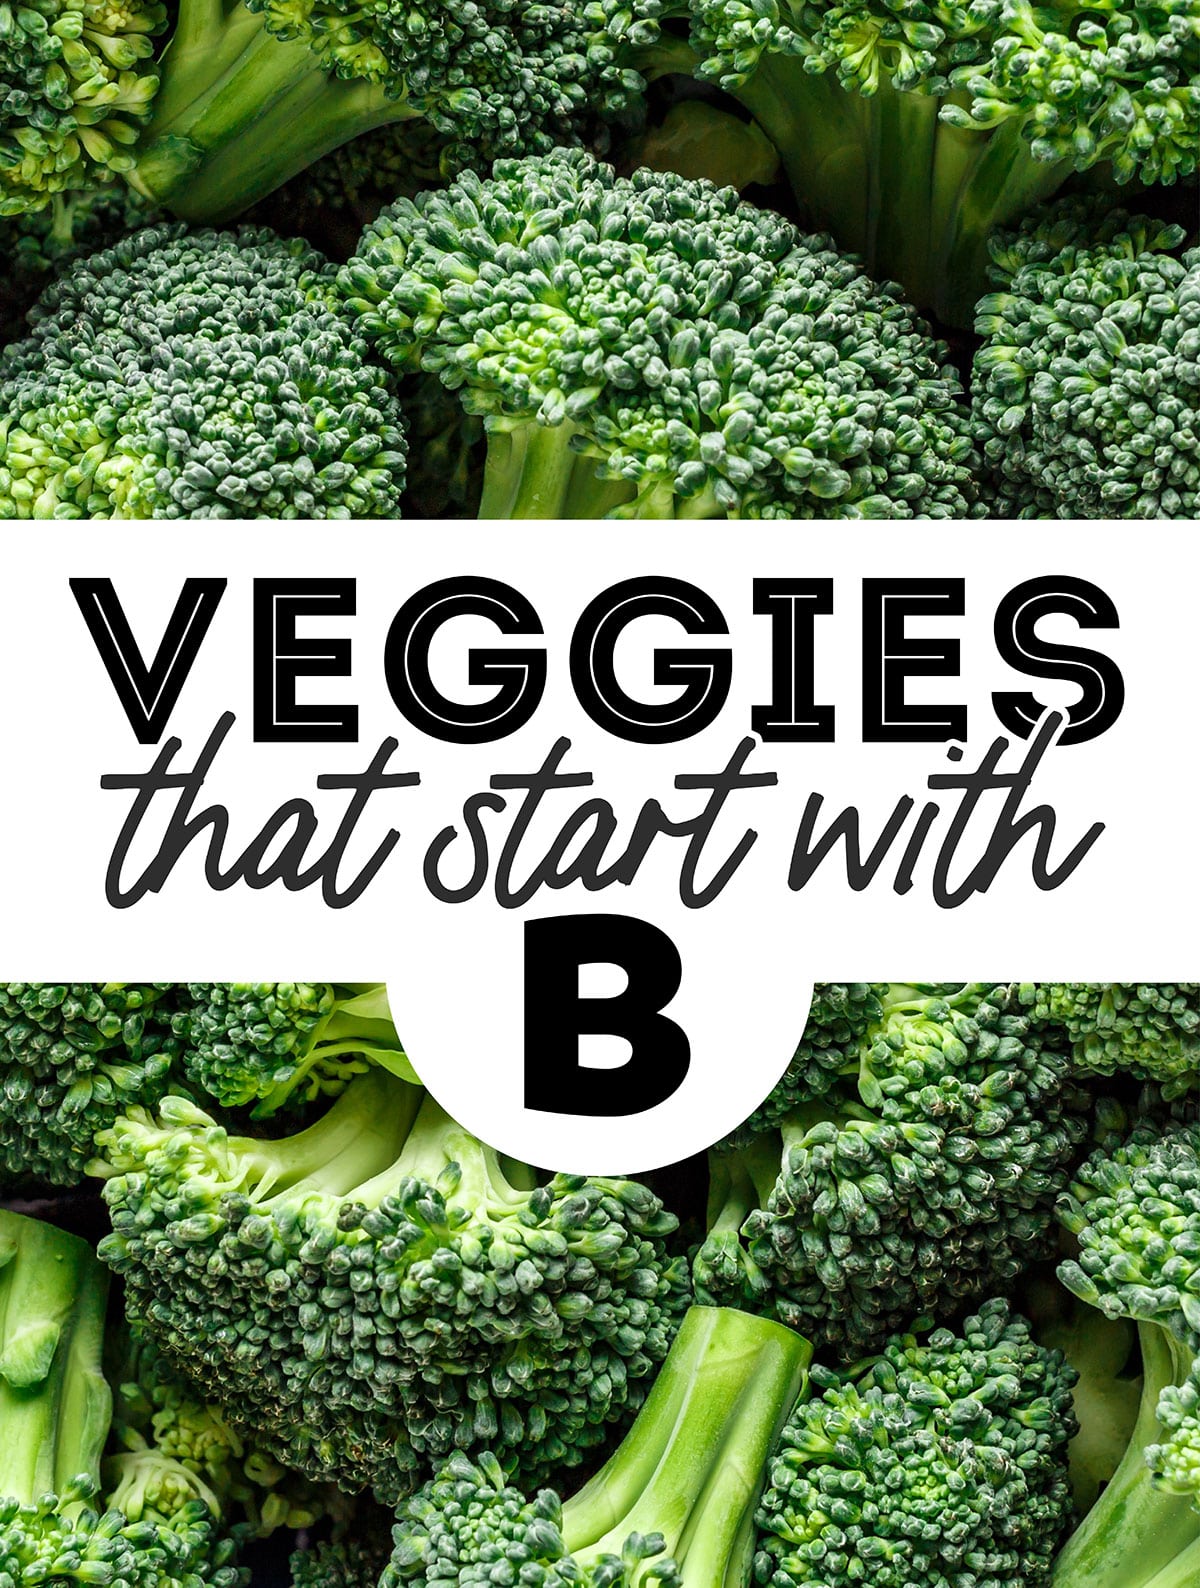 Collage that says "vegetables that start with B".